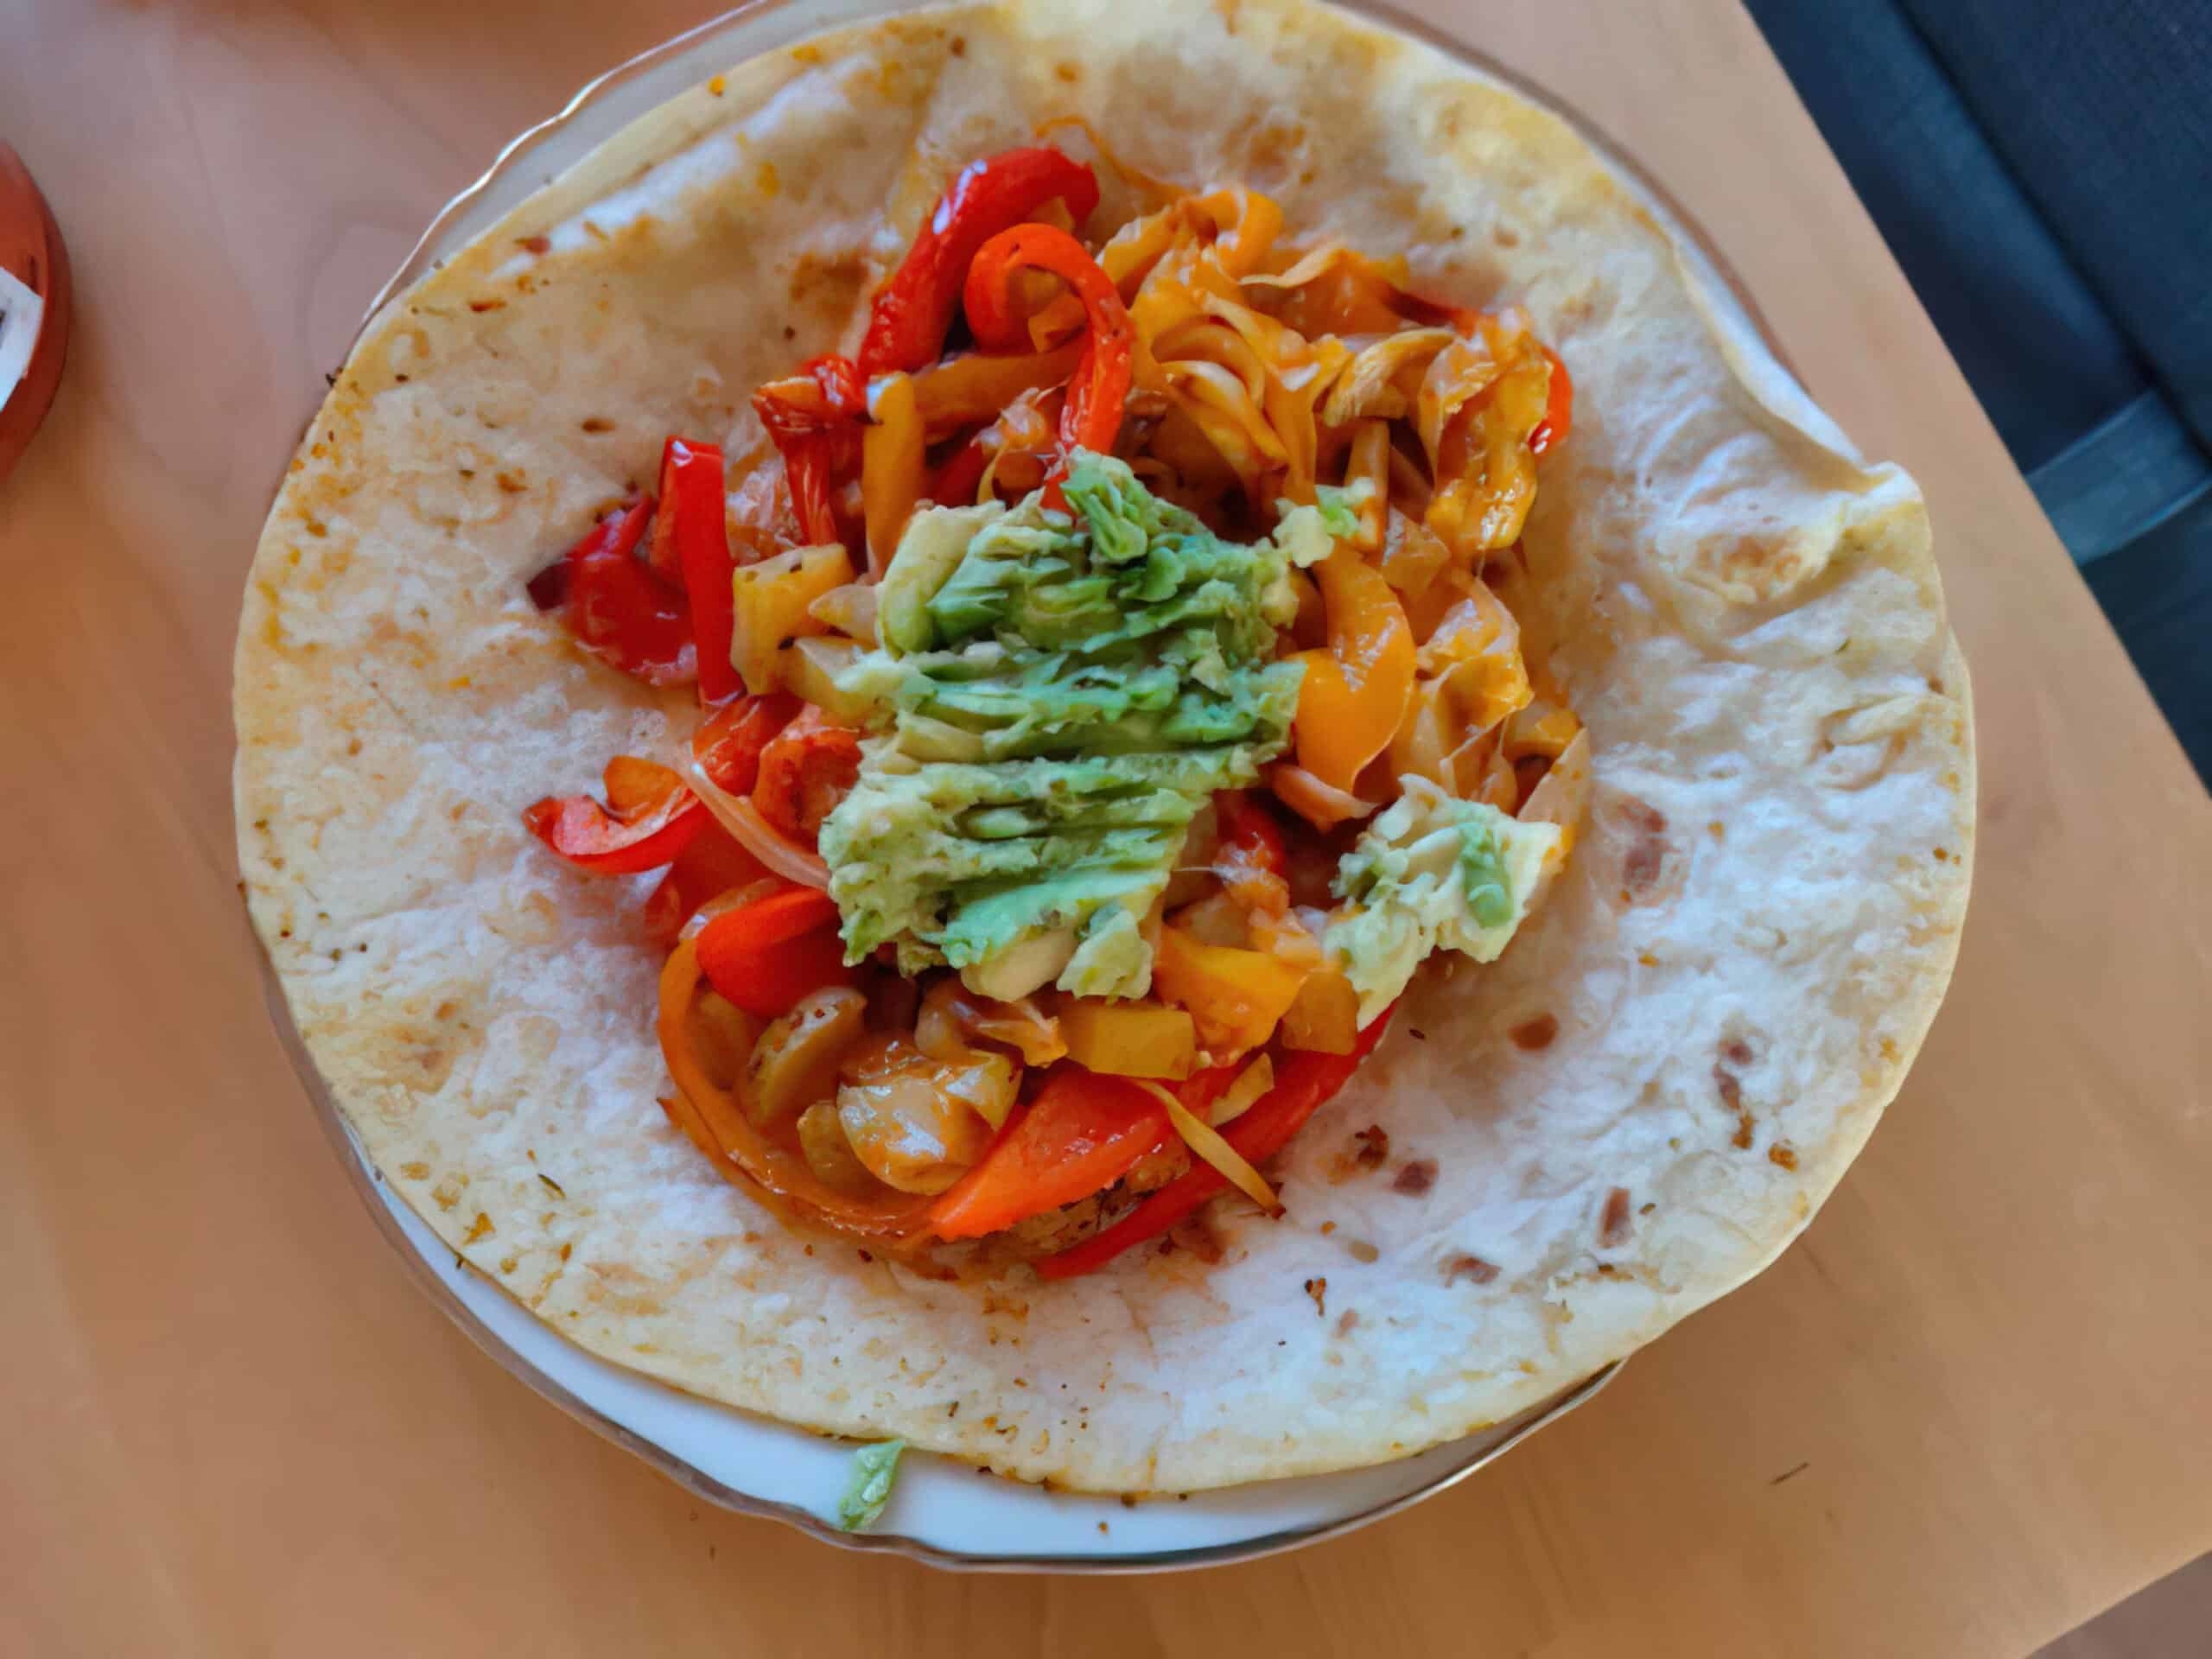 A tortilla topped with grilled potatoes, peppers, onion, and guacamole.